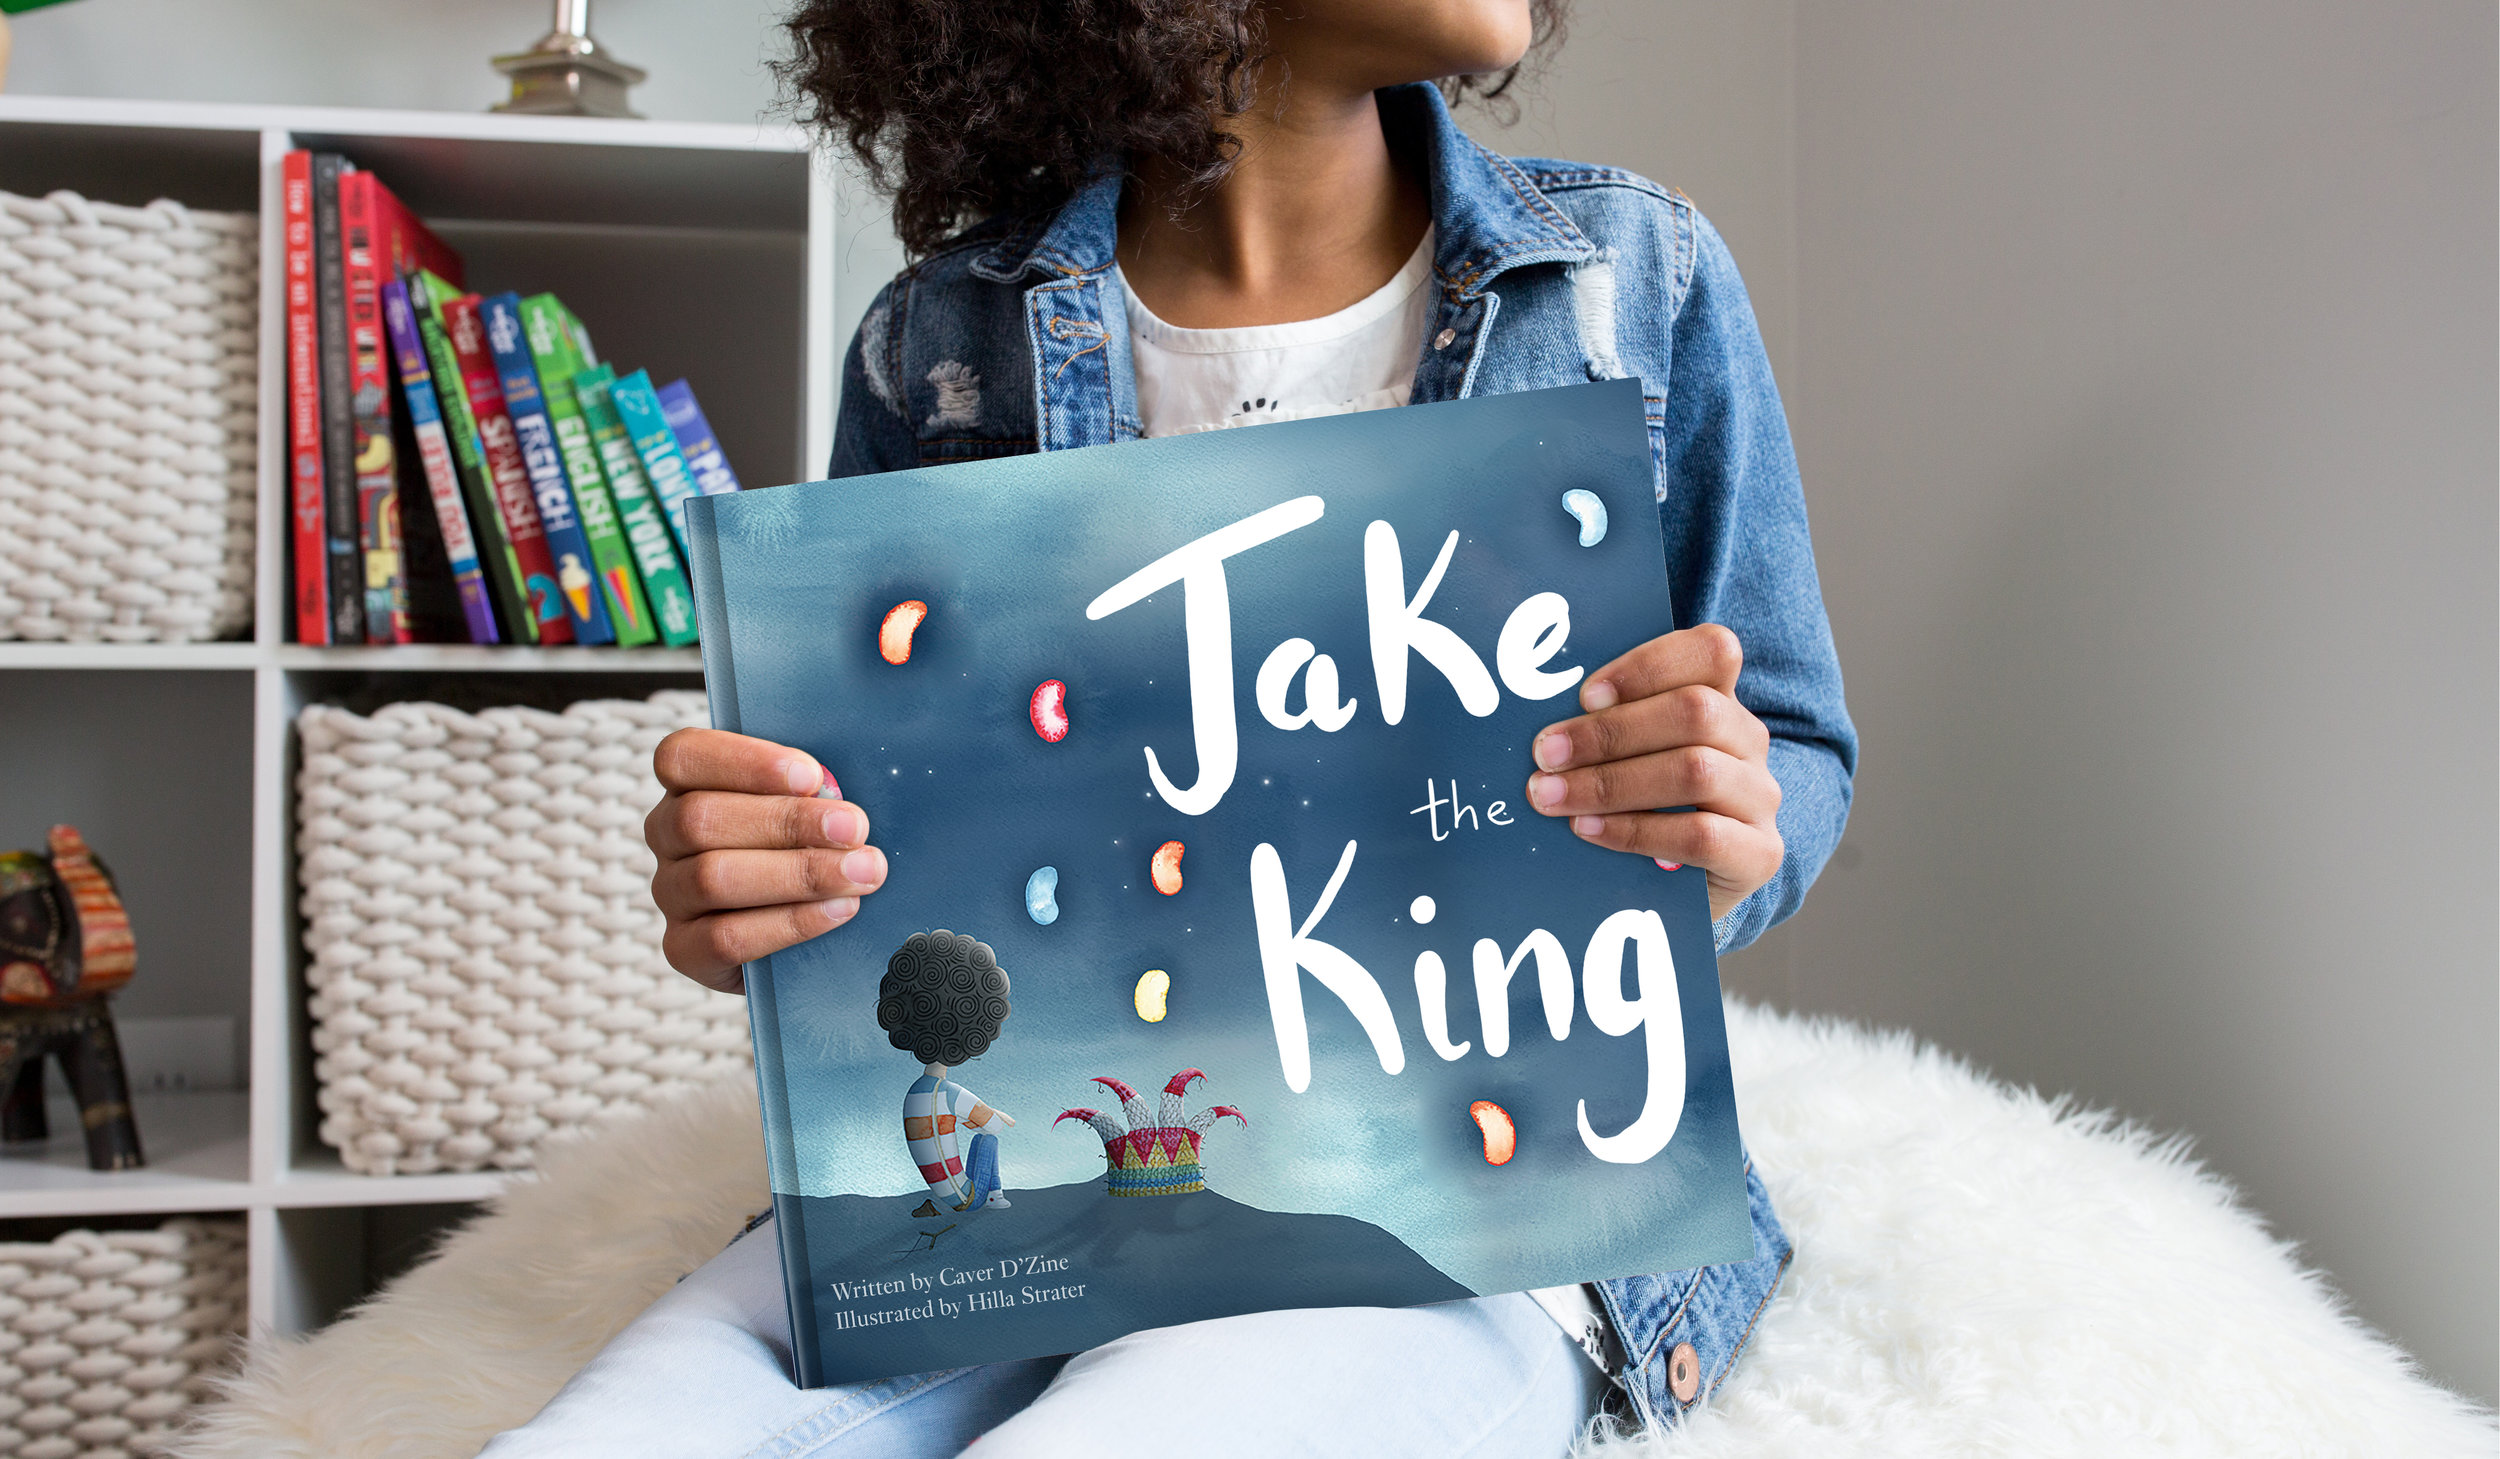 Book cover design – Jake the king